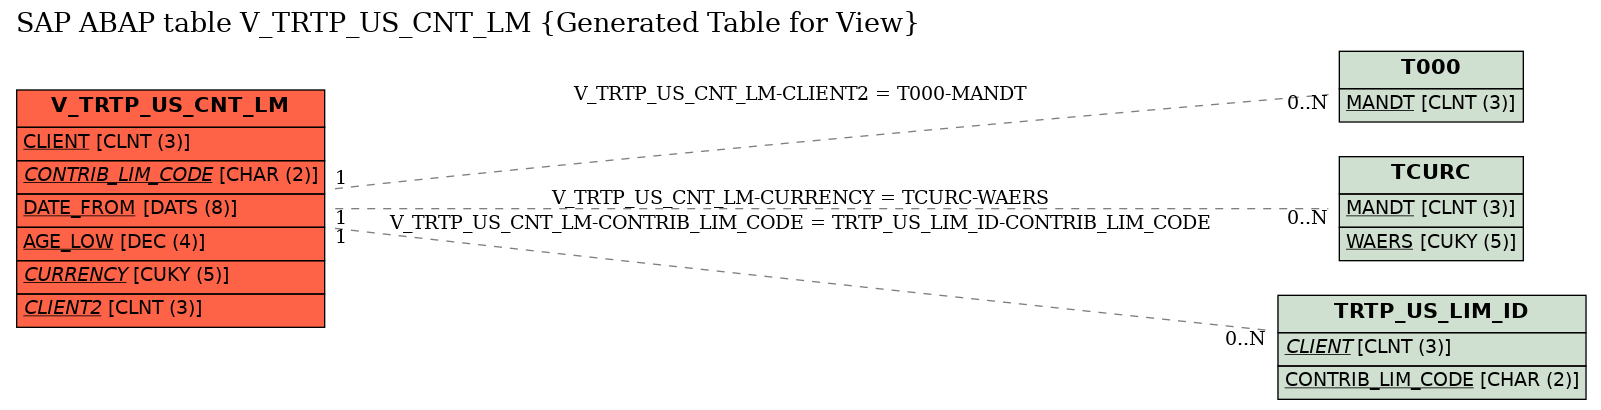 E-R Diagram for table V_TRTP_US_CNT_LM (Generated Table for View)